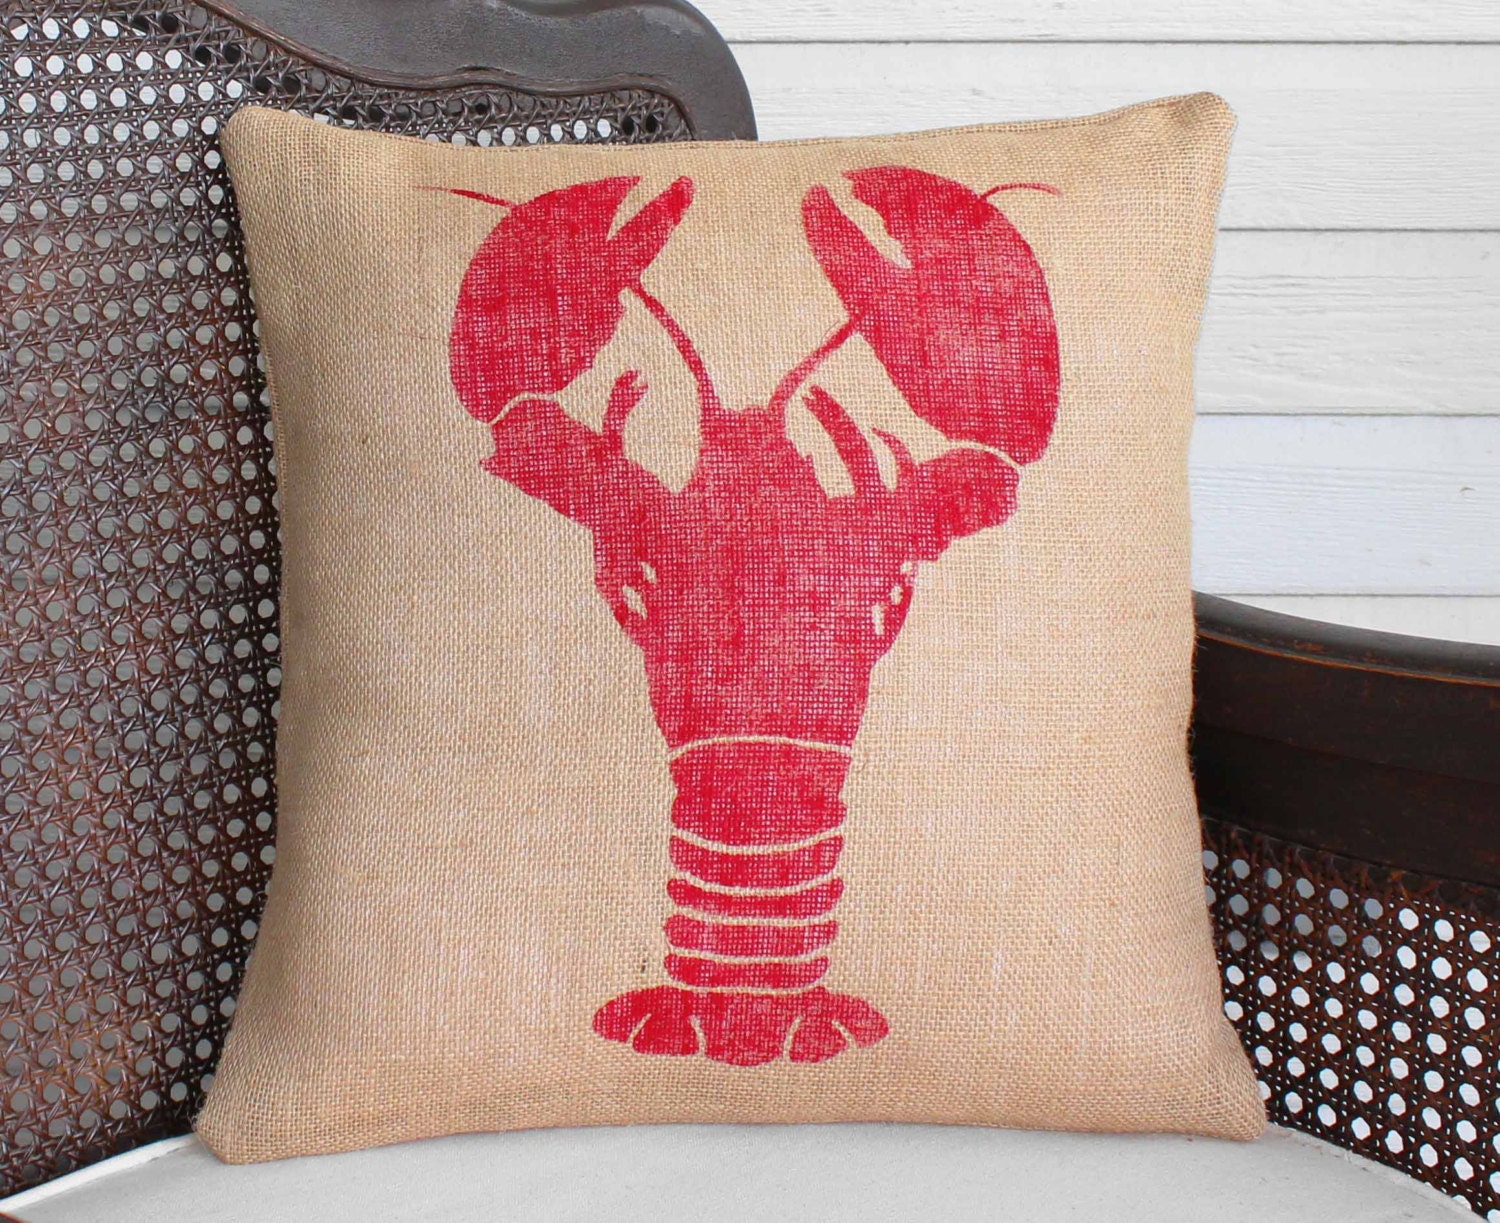 Lobster Red and White Pillow Cover, Throw Pillow Cushion, 14 x 14